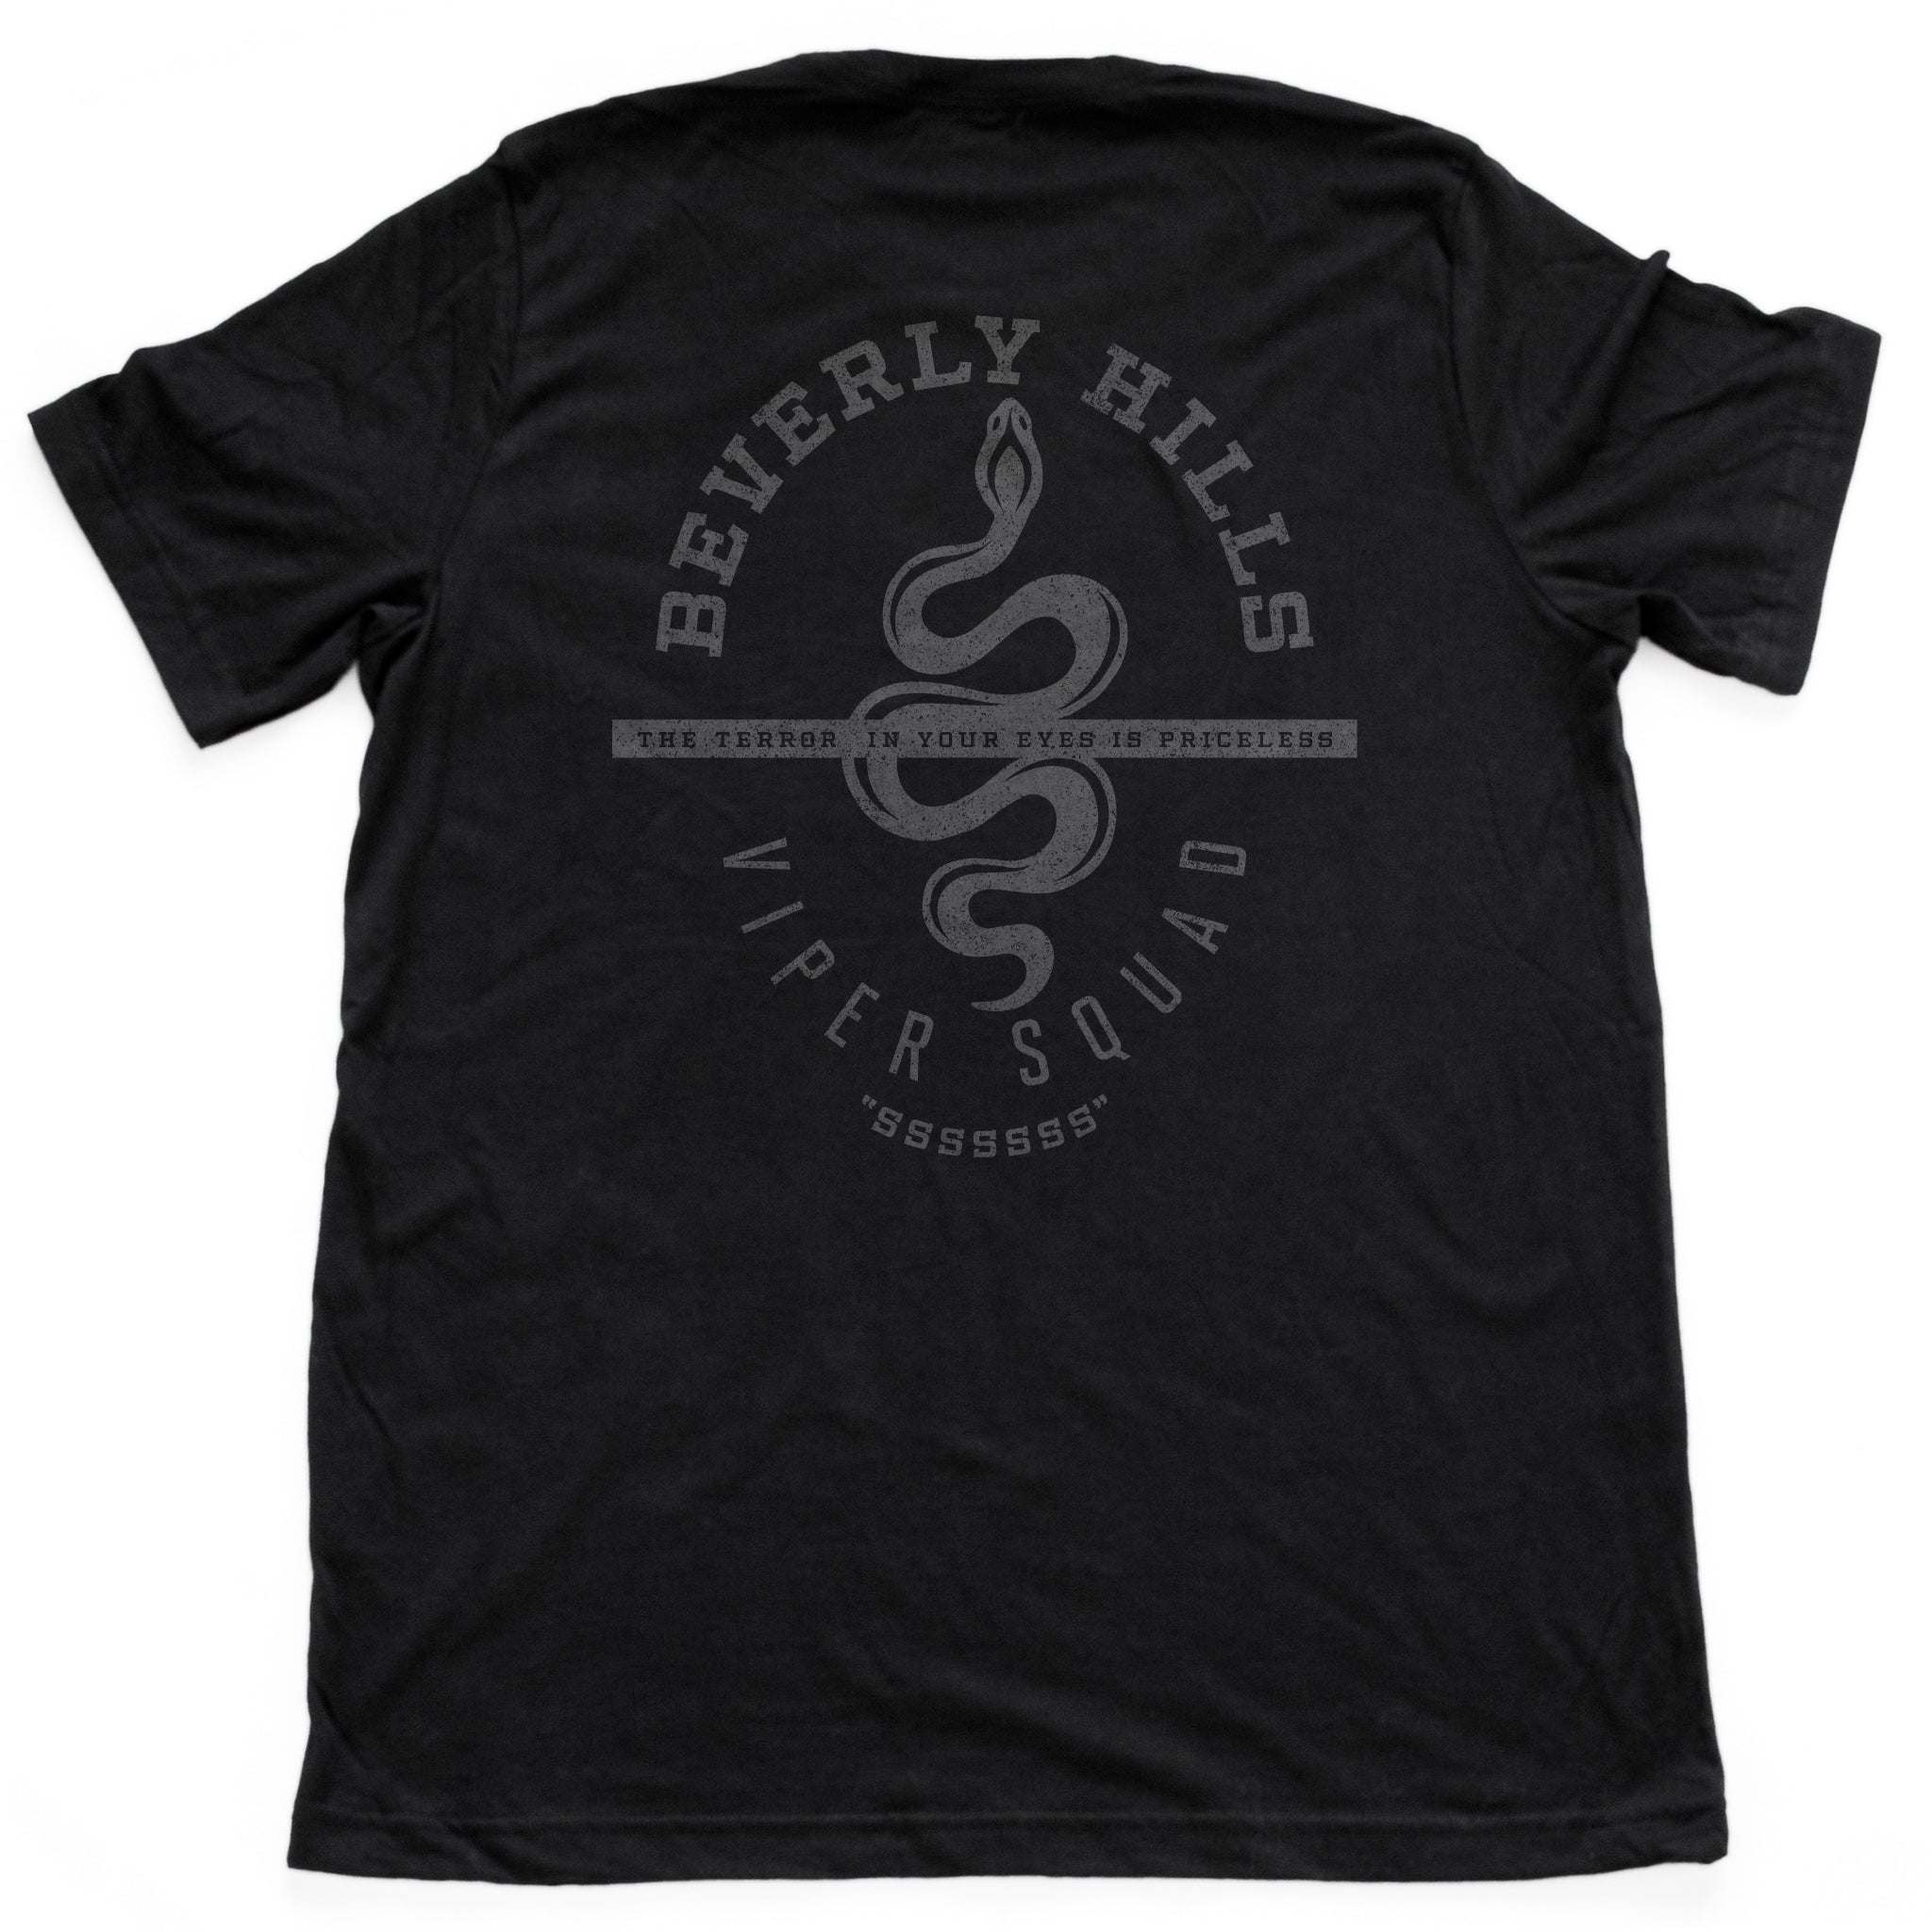 Retro, vintage-inspired sarcastic fashion t-shirt with a graphic design snake (viper), for a fictional club or gang in Beverly Hills, California. From the brand Ruston/Bond.